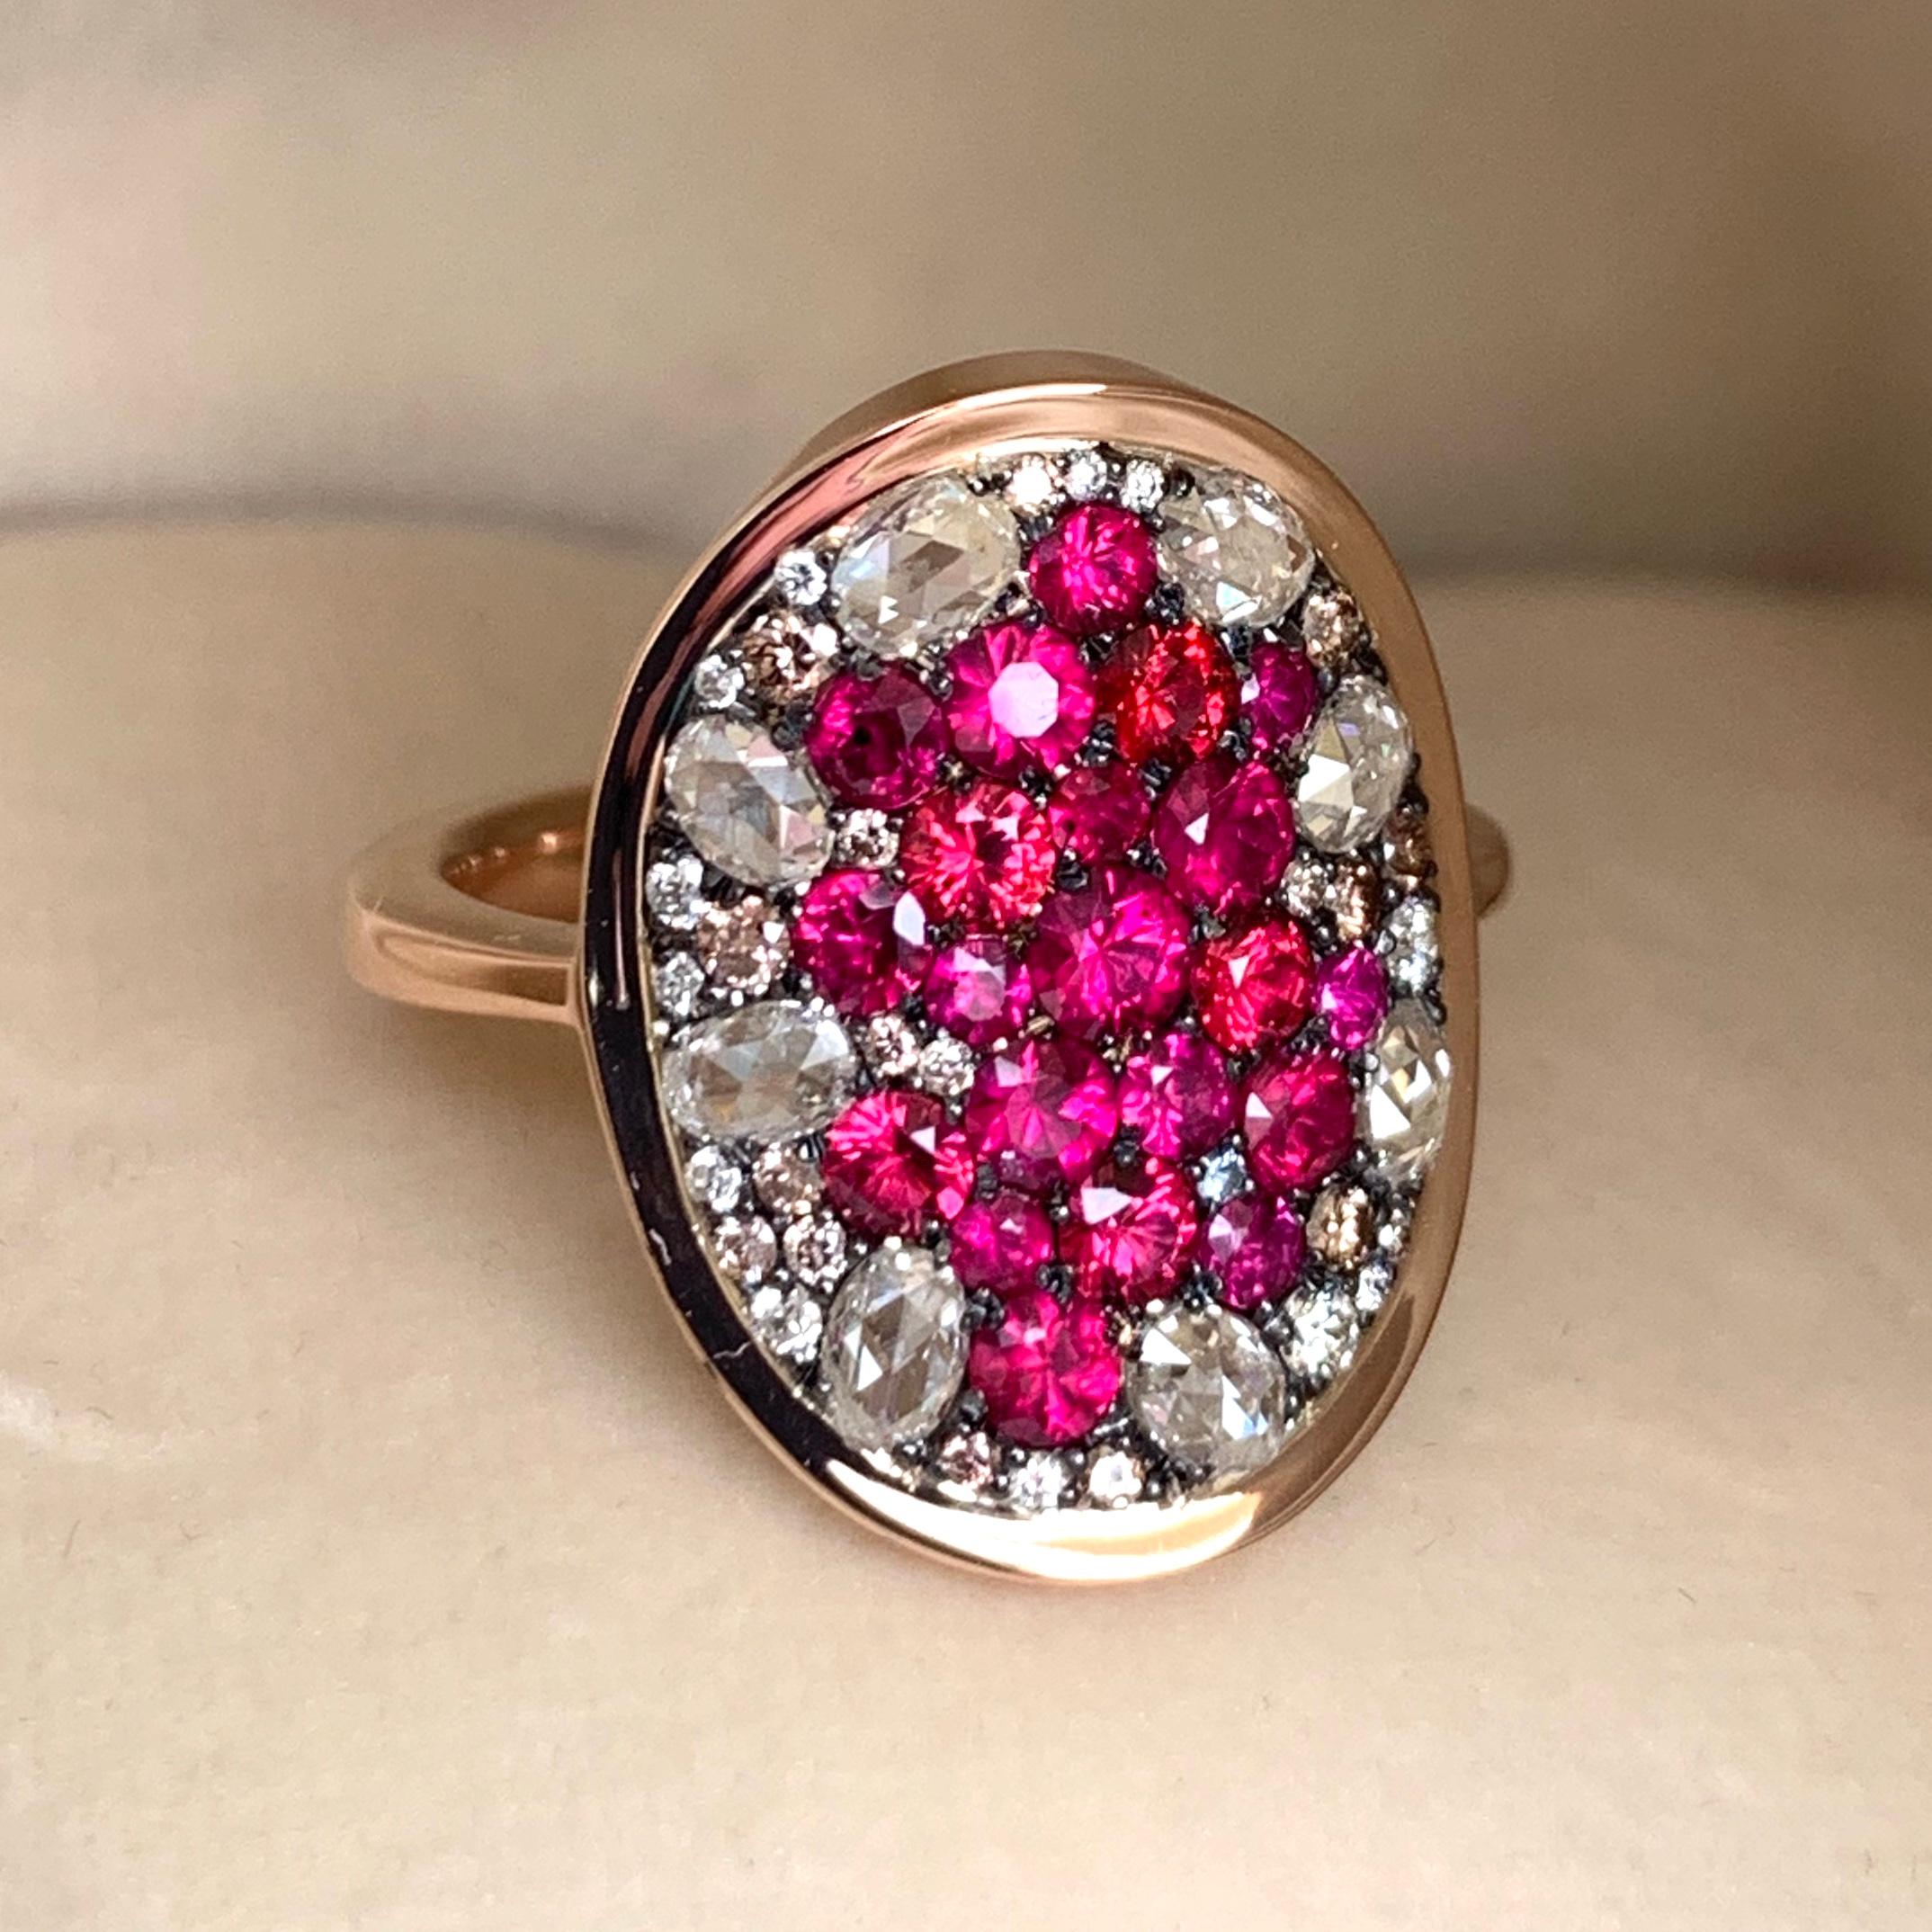 One of a kind ring handmade in Belgium by jewelry designer Joke Quick, in 18K Rose gold 5,6 g & blackened sterling silver 2g (The stones are set on silver to create a black background for the stones the rest of the ring is made in 18K gold))
Pave